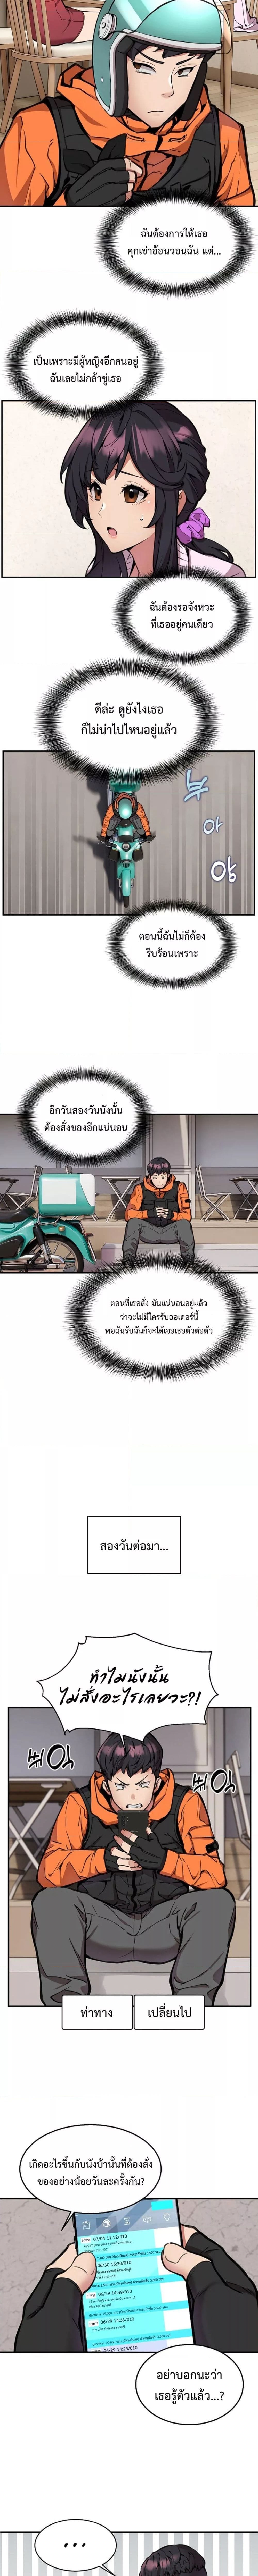 Driver in the New City ตอนที่ 2 ภาพ 2